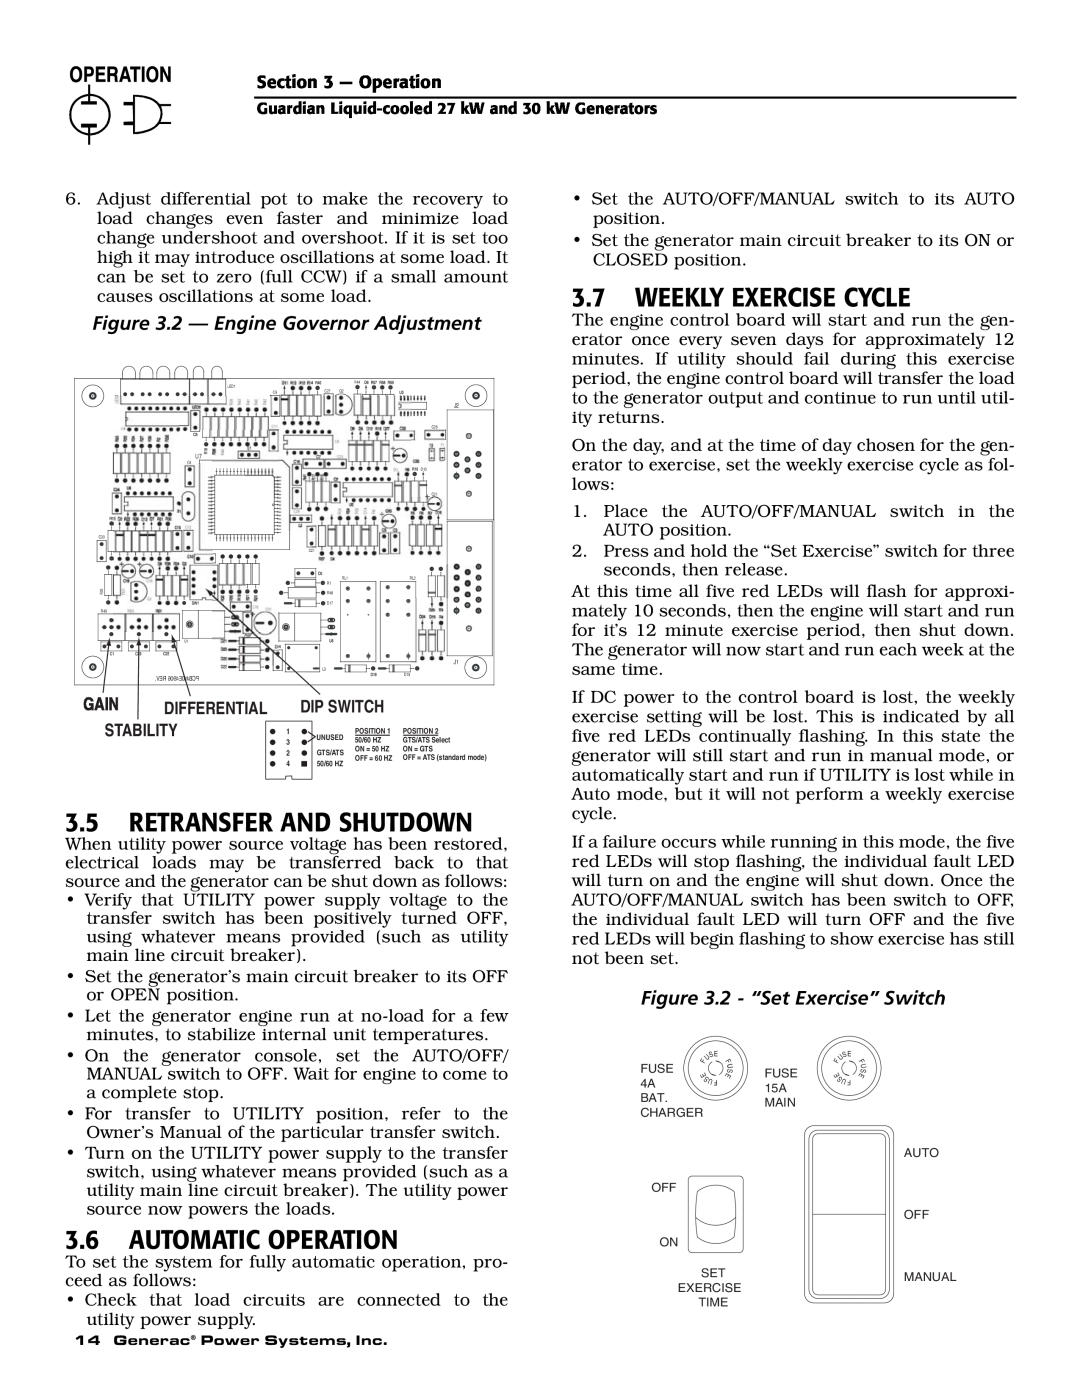 Generac Power Systems 004988-1 owner manual 3.7WEEKLY EXERCISE CYCLE, 3.5RETRANSFER AND SHUTDOWN, 3.6AUTOMATIC OPERATION 